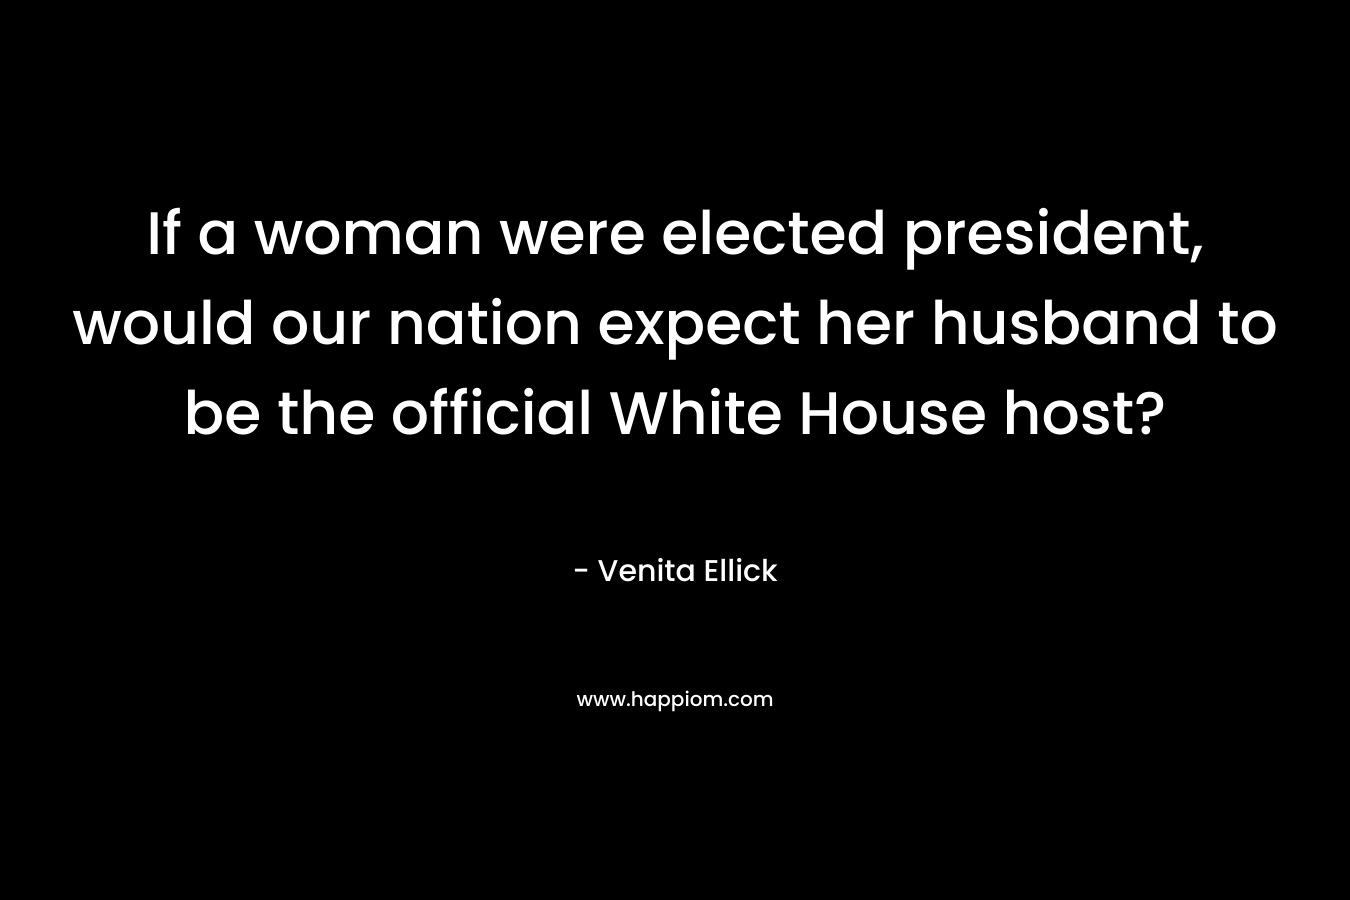 If a woman were elected president, would our nation expect her husband to be the official White House host? – Venita Ellick